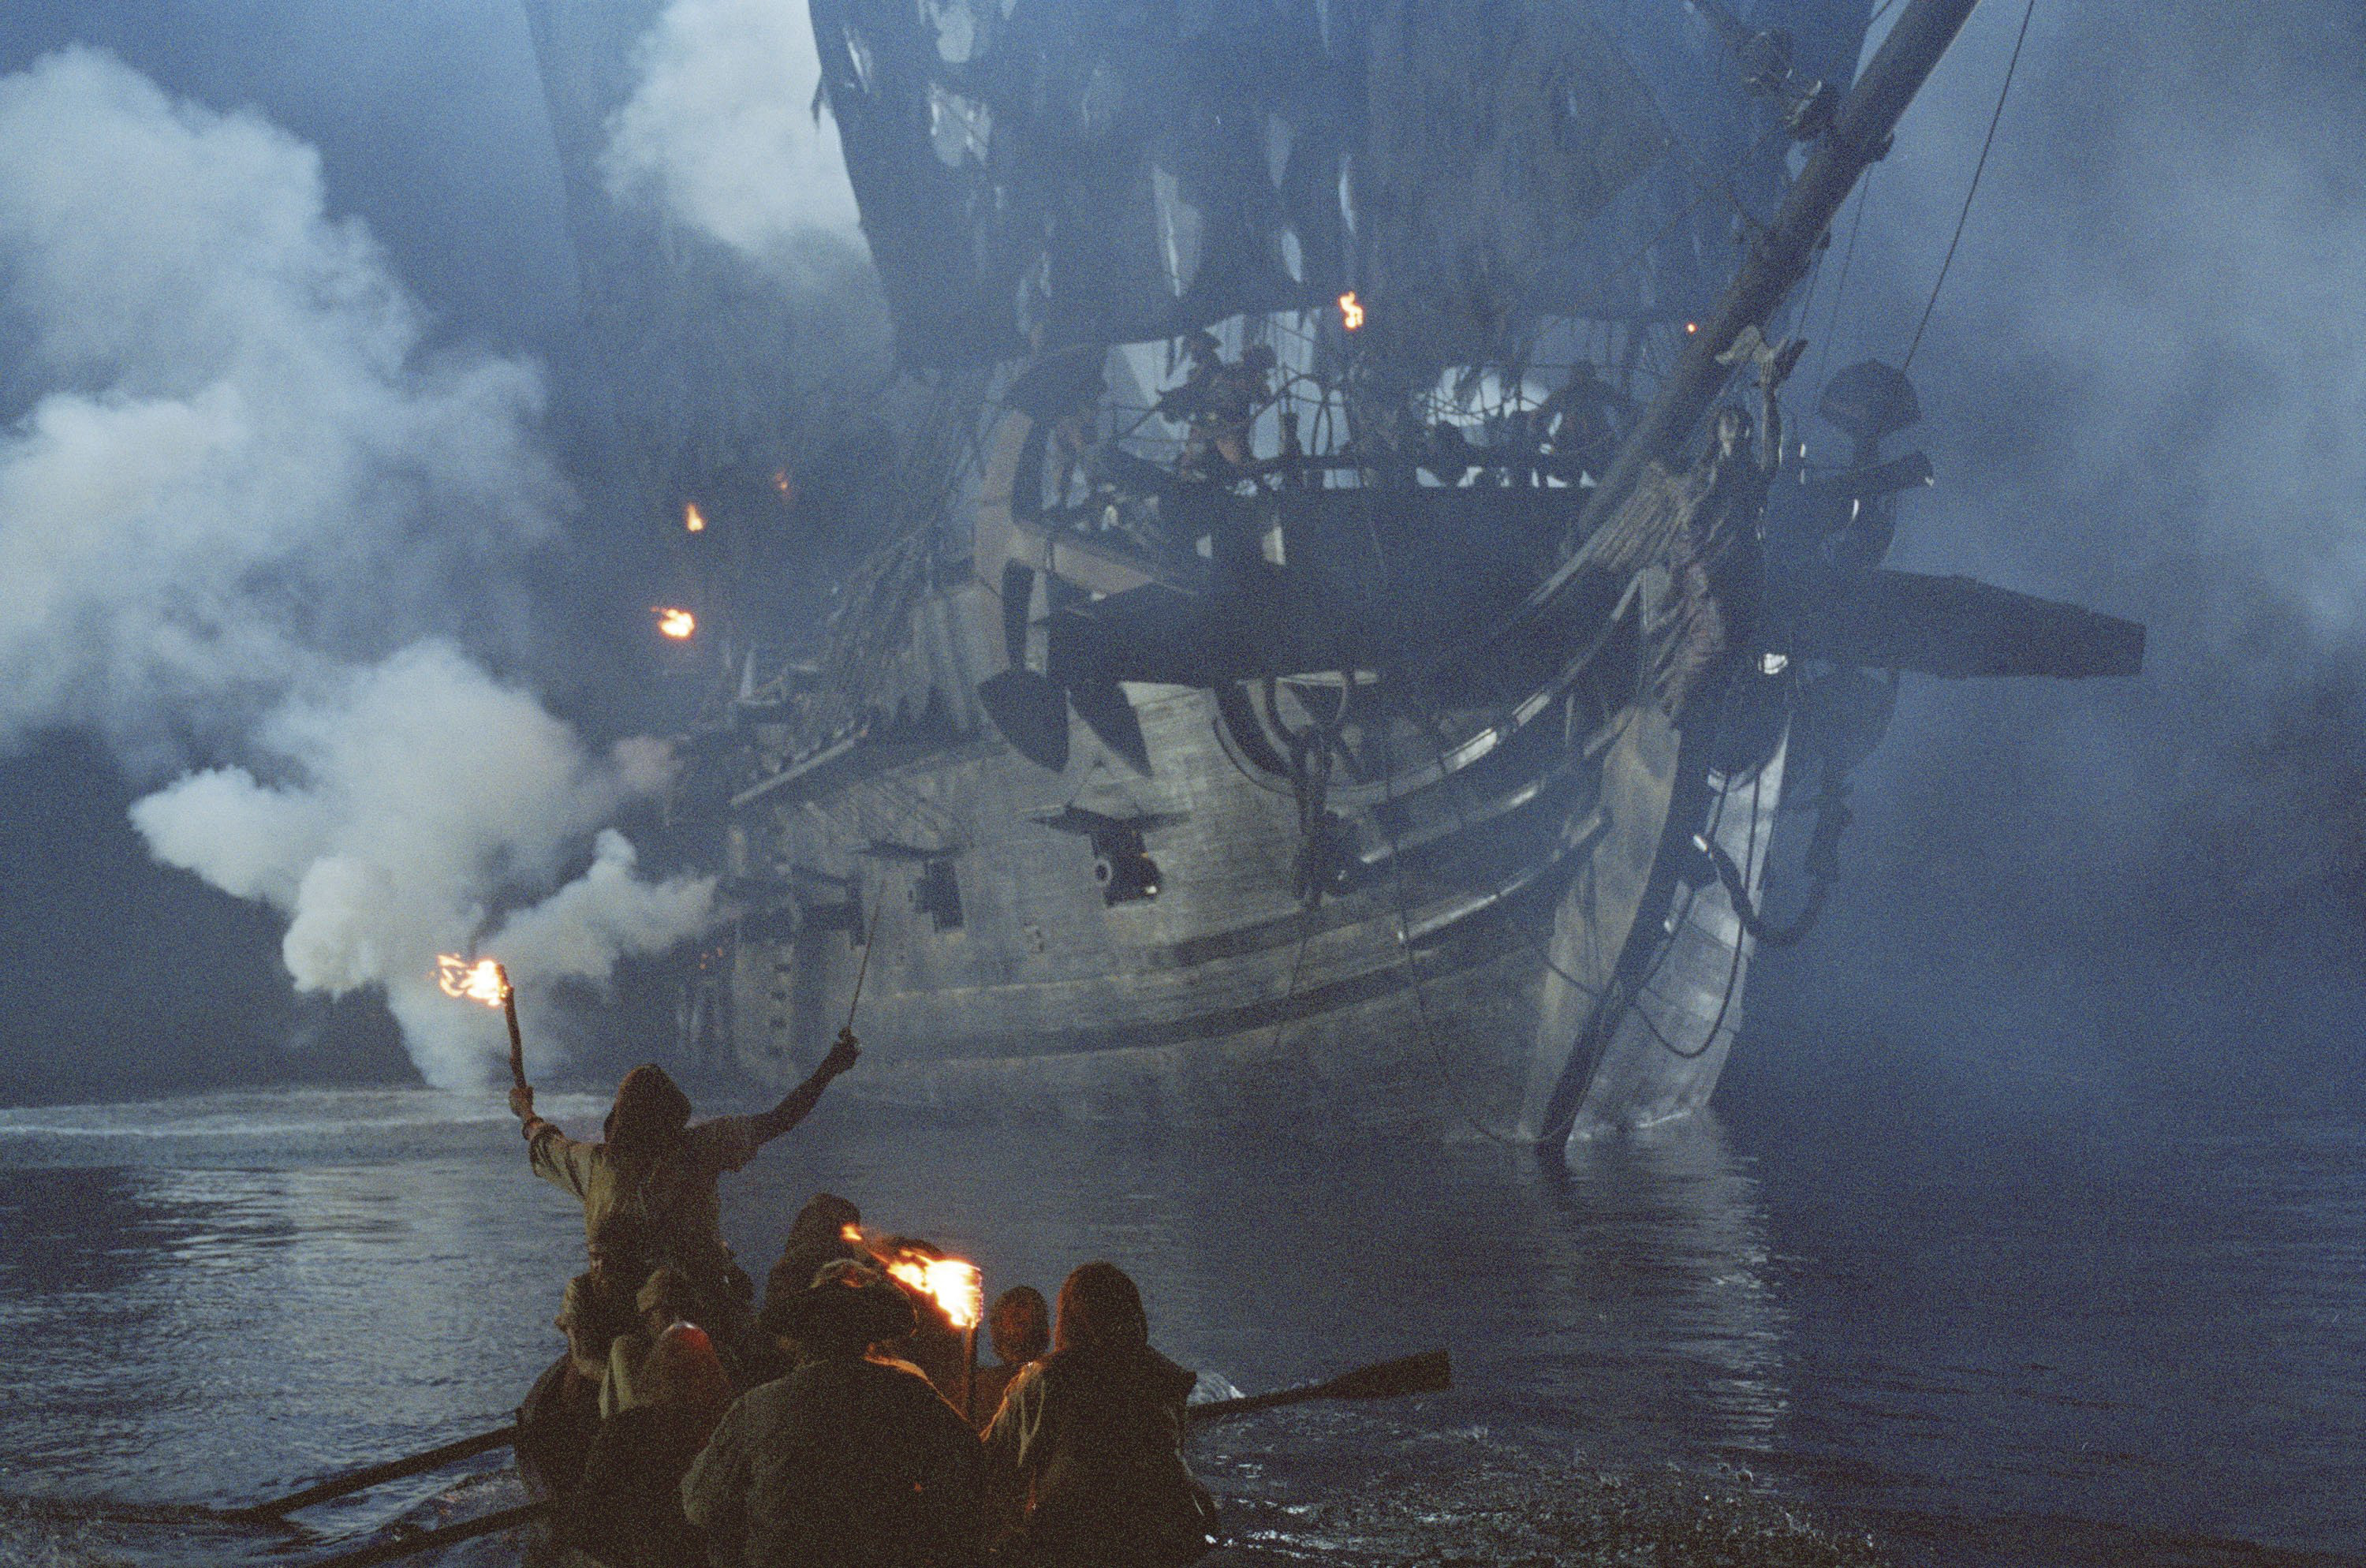 pirates of the caribbean, movie, pirates of the caribbean: the curse of the black pearl